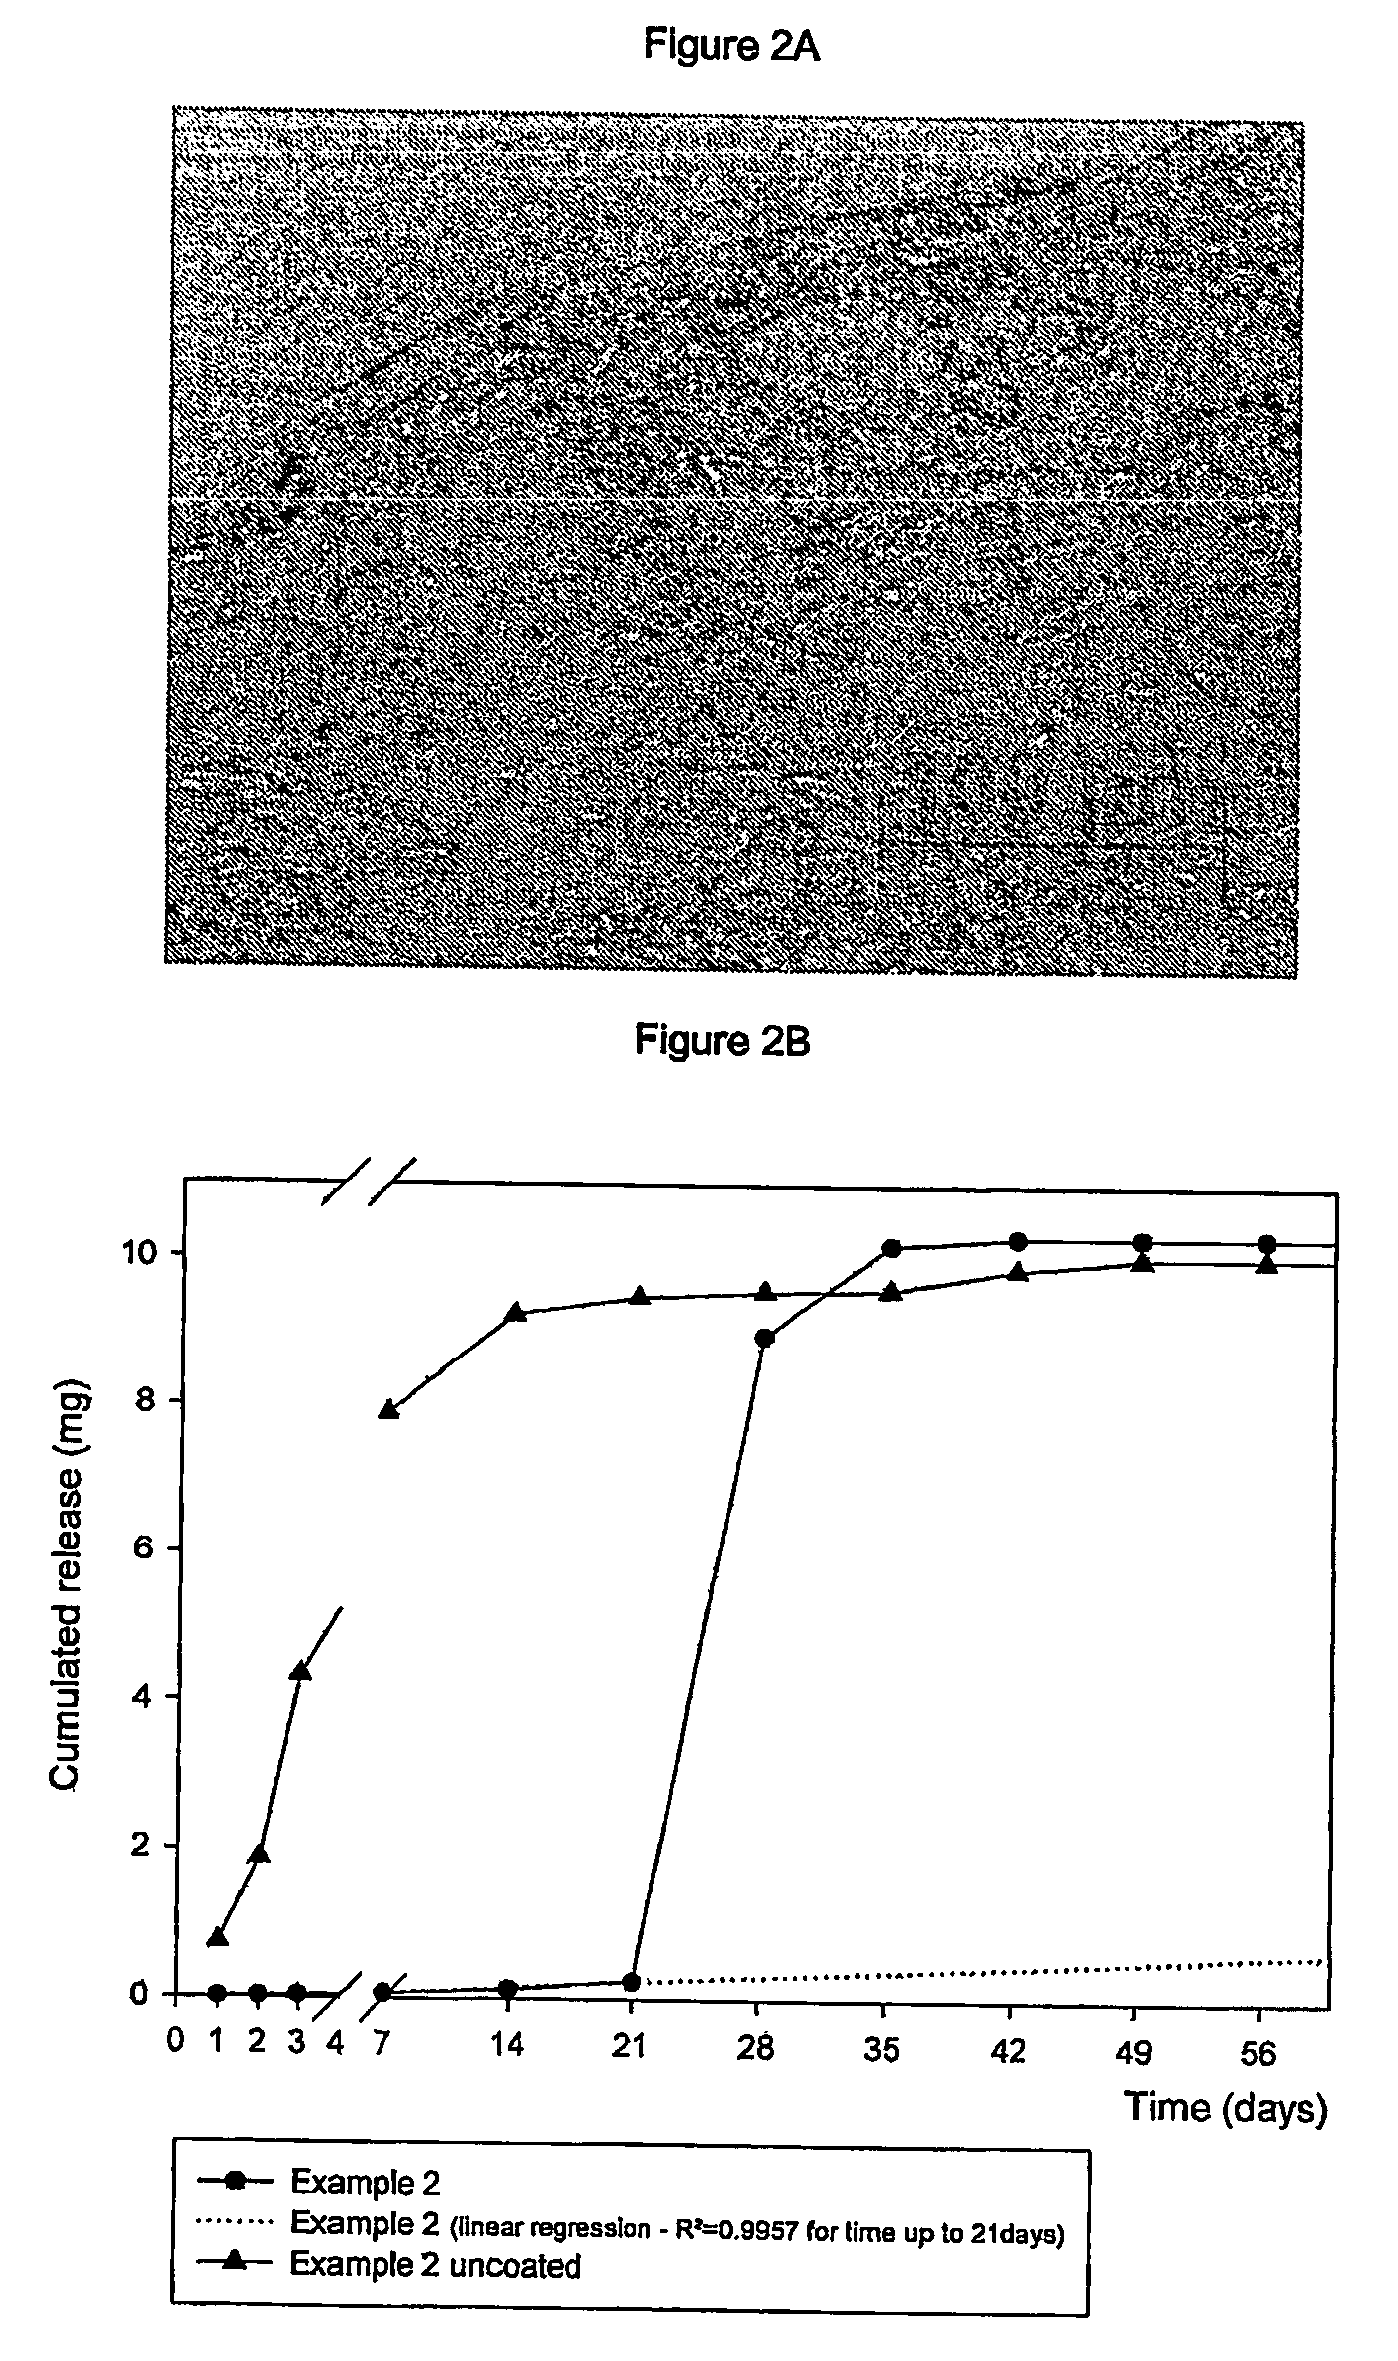 Subcutaneous implants having limited initial release of the active principle and subsequent linearly varying extended release thereof